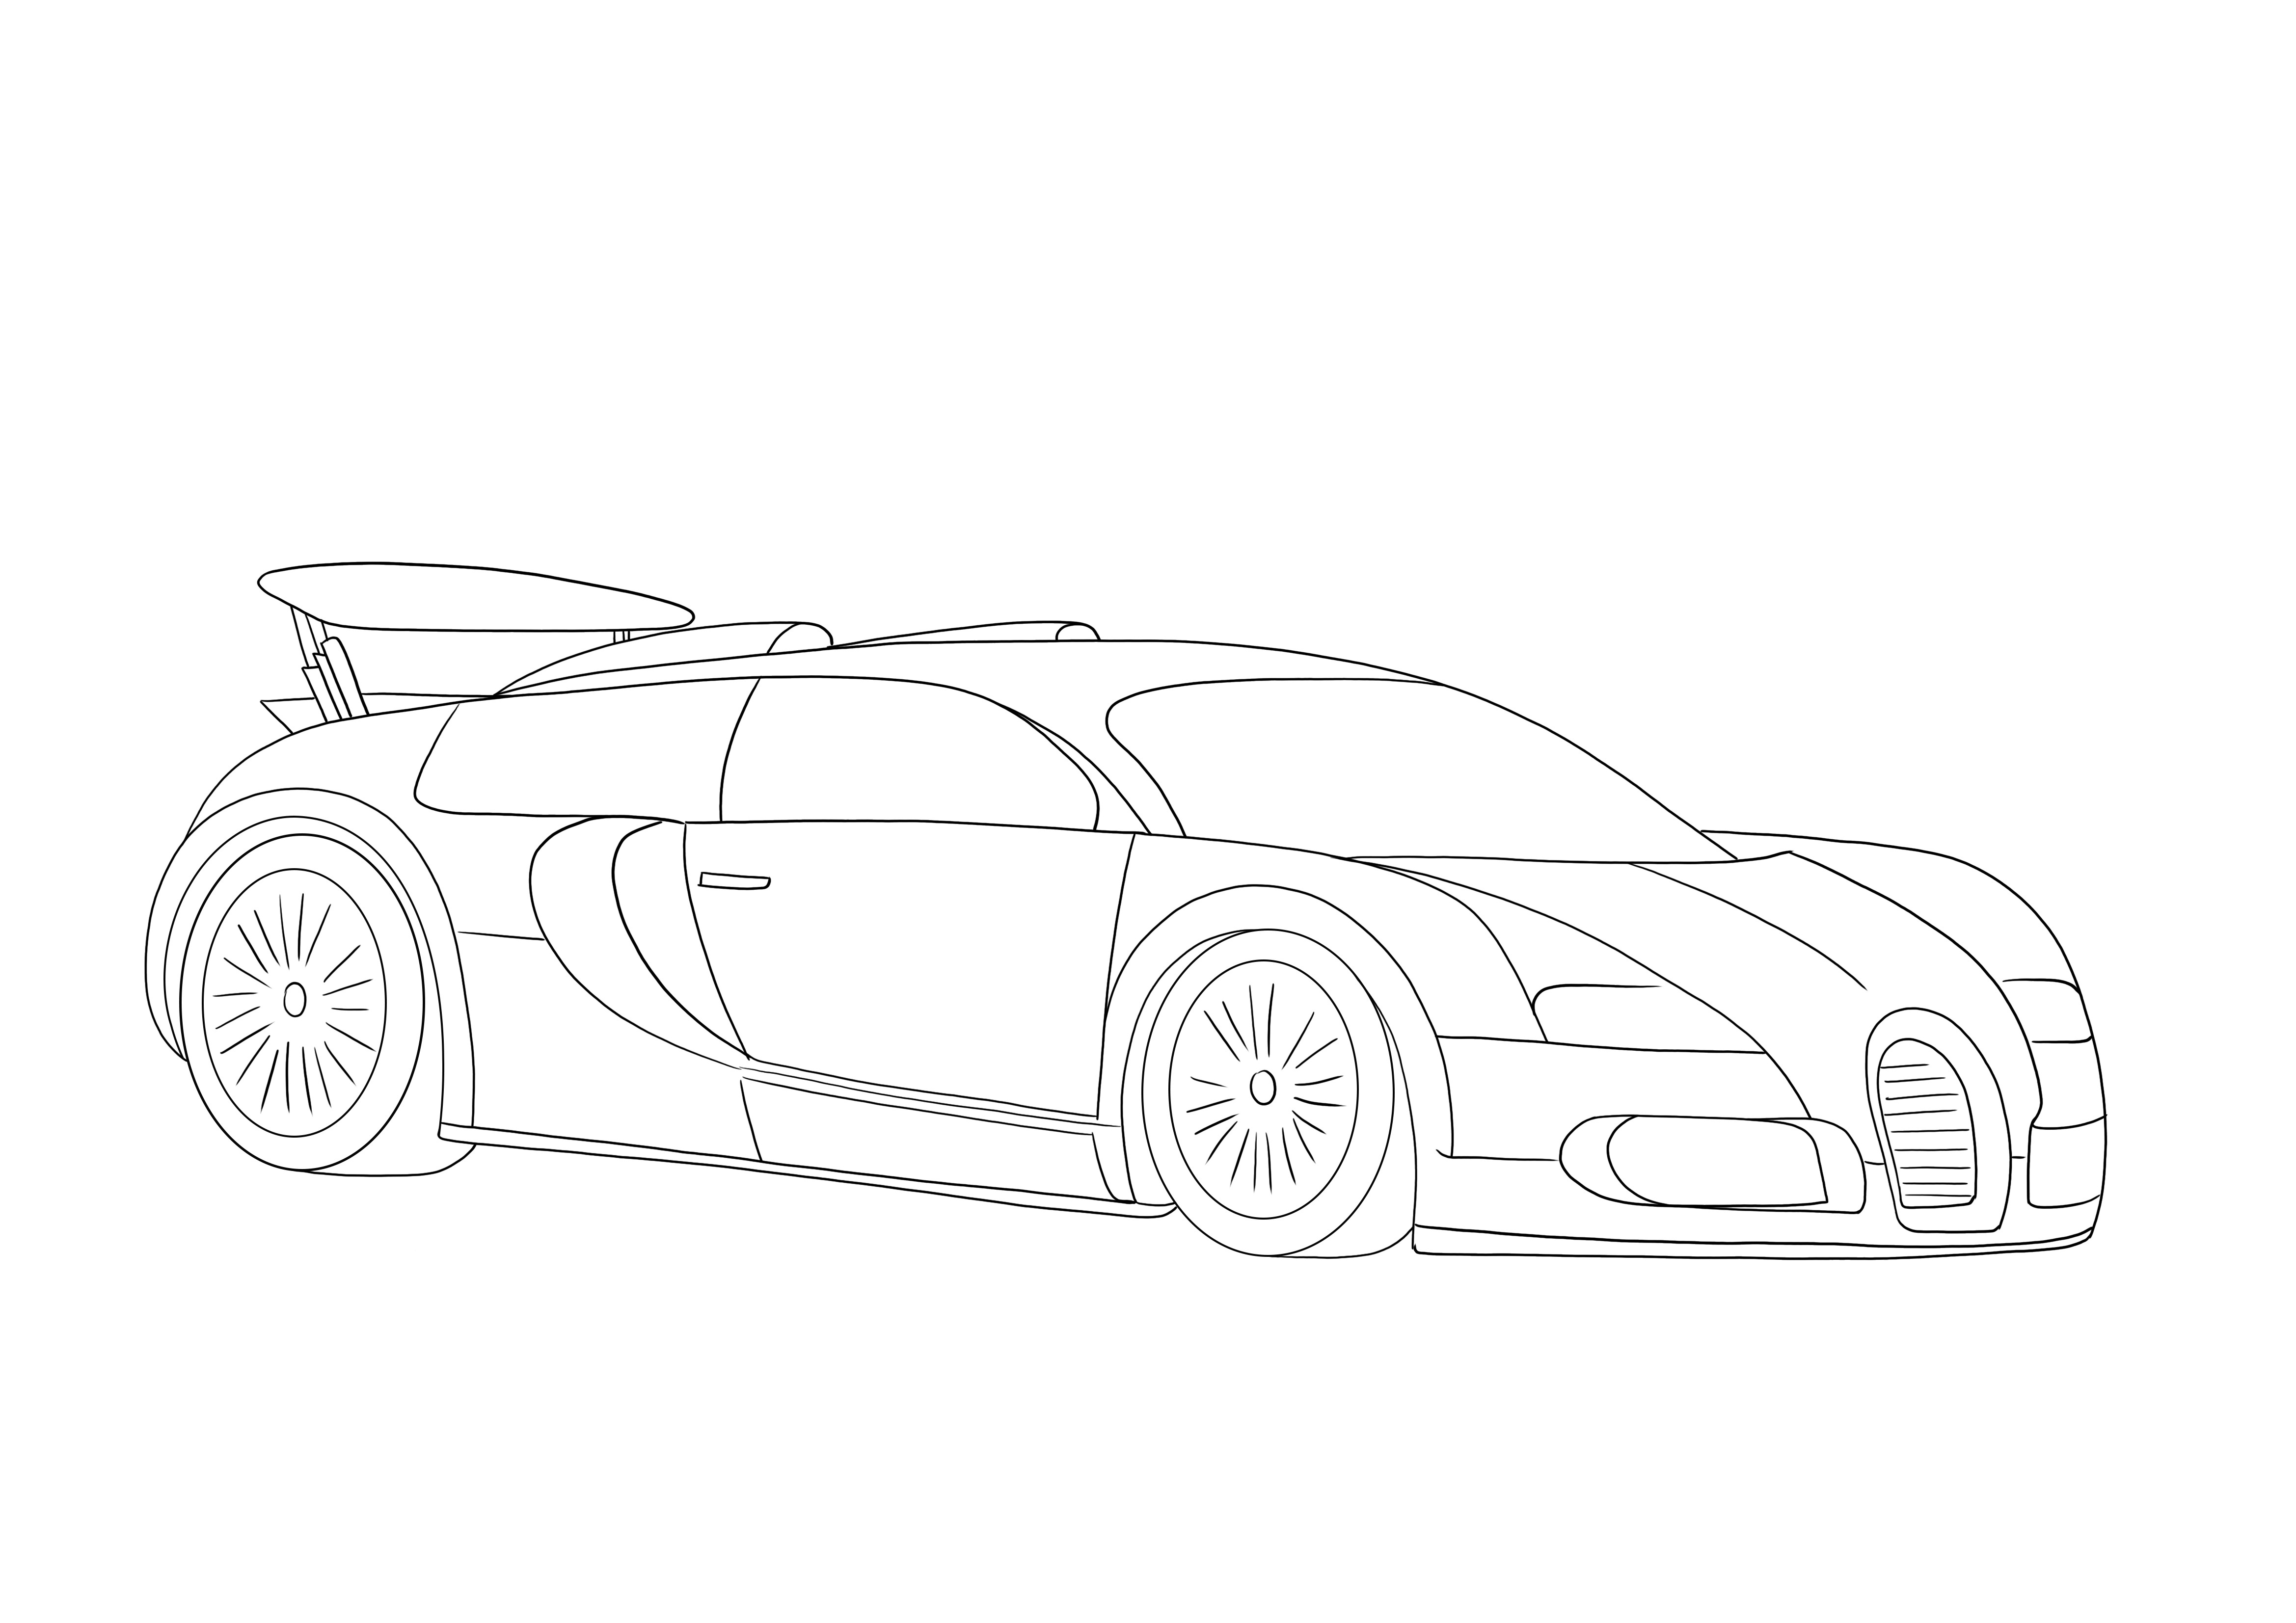 Our super cool 2005 Bugatti Veyron is free to print and ready to be colored